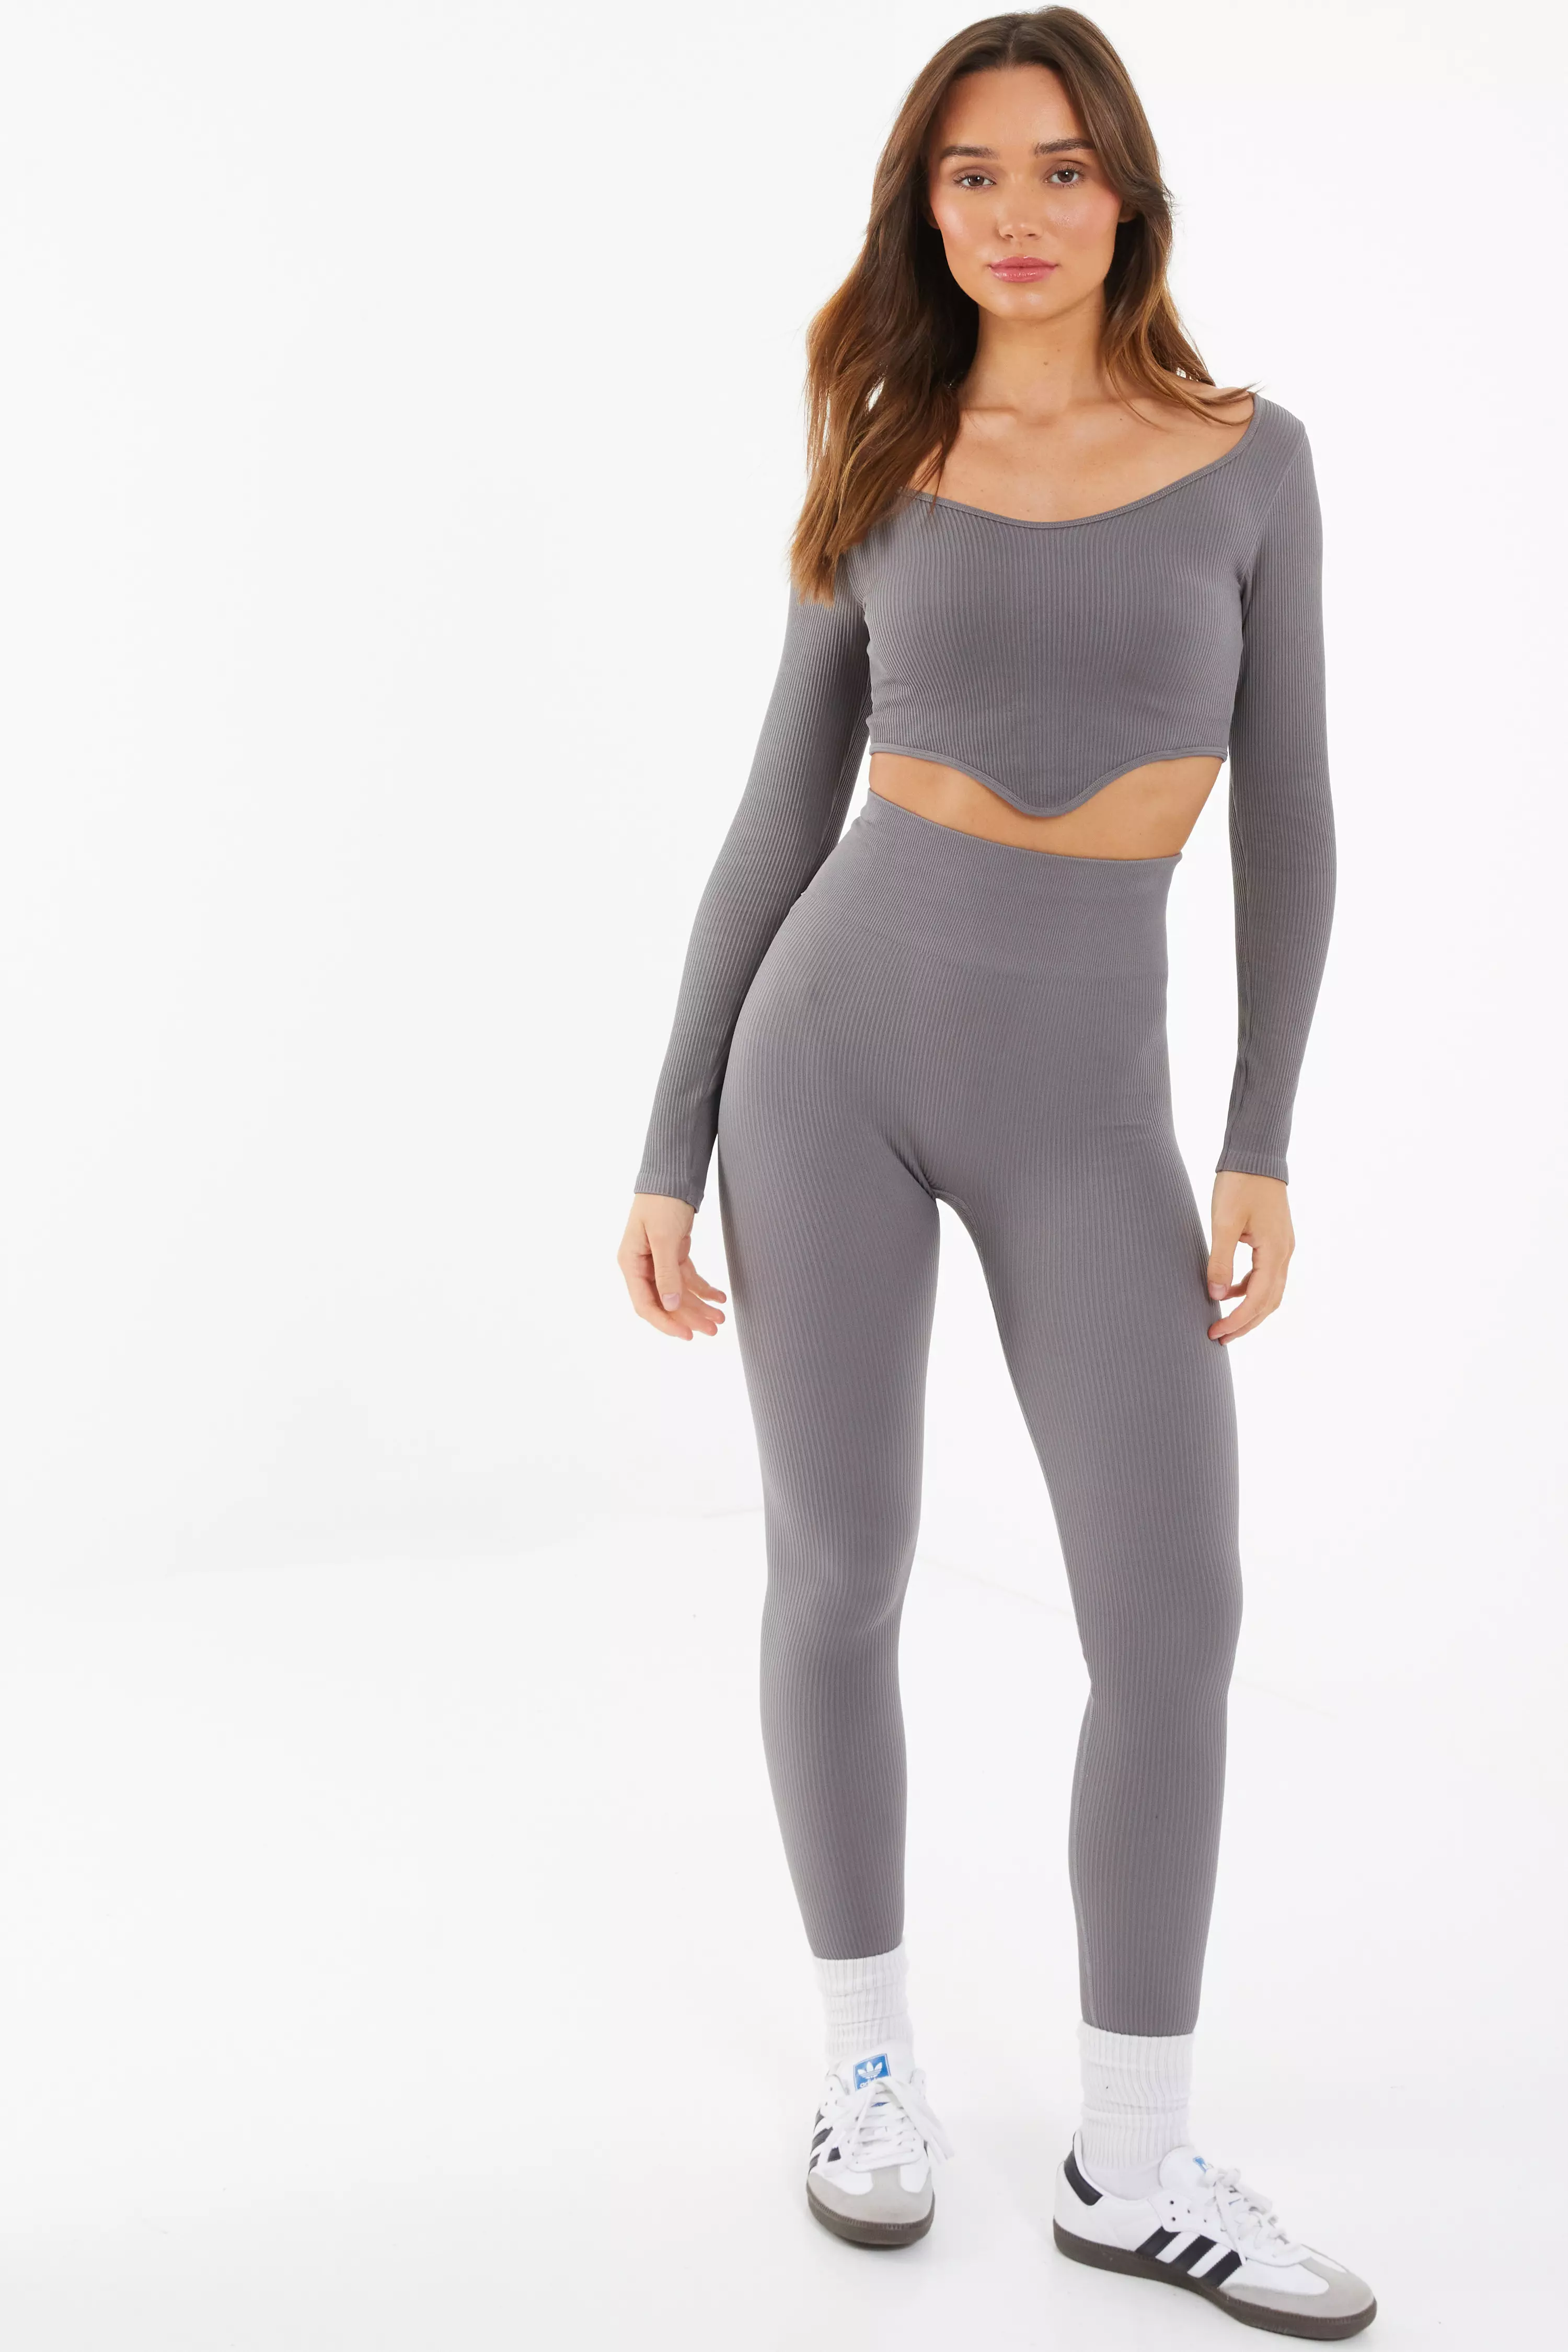 Missguided Petite loungewear co-ord fluffy ribbed legging in grey